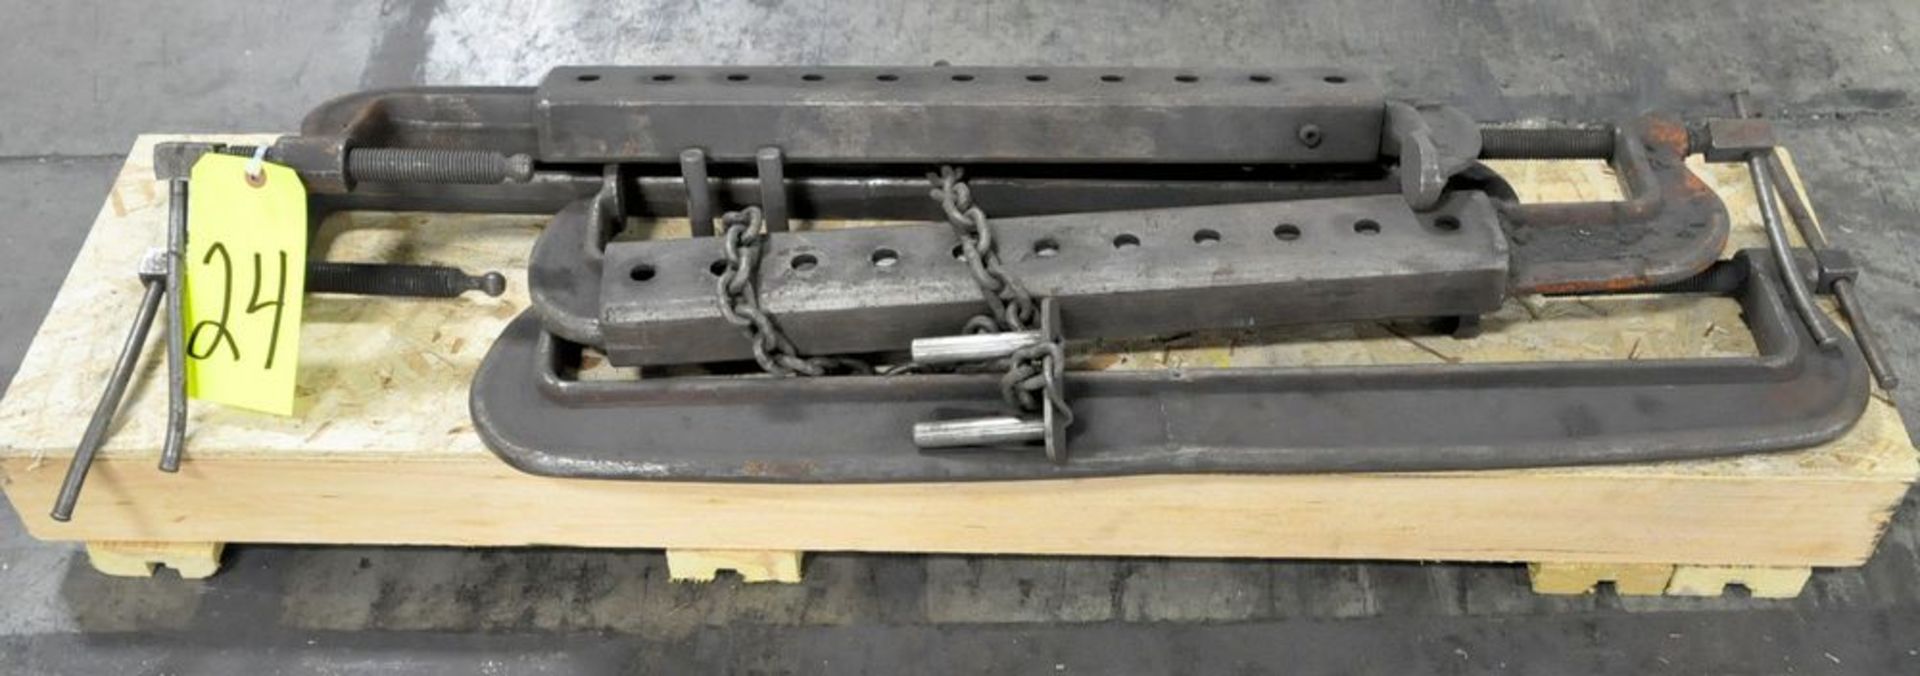 Lot-(4) 24" Die Clamps on (1) Pallet, (Plant 2)